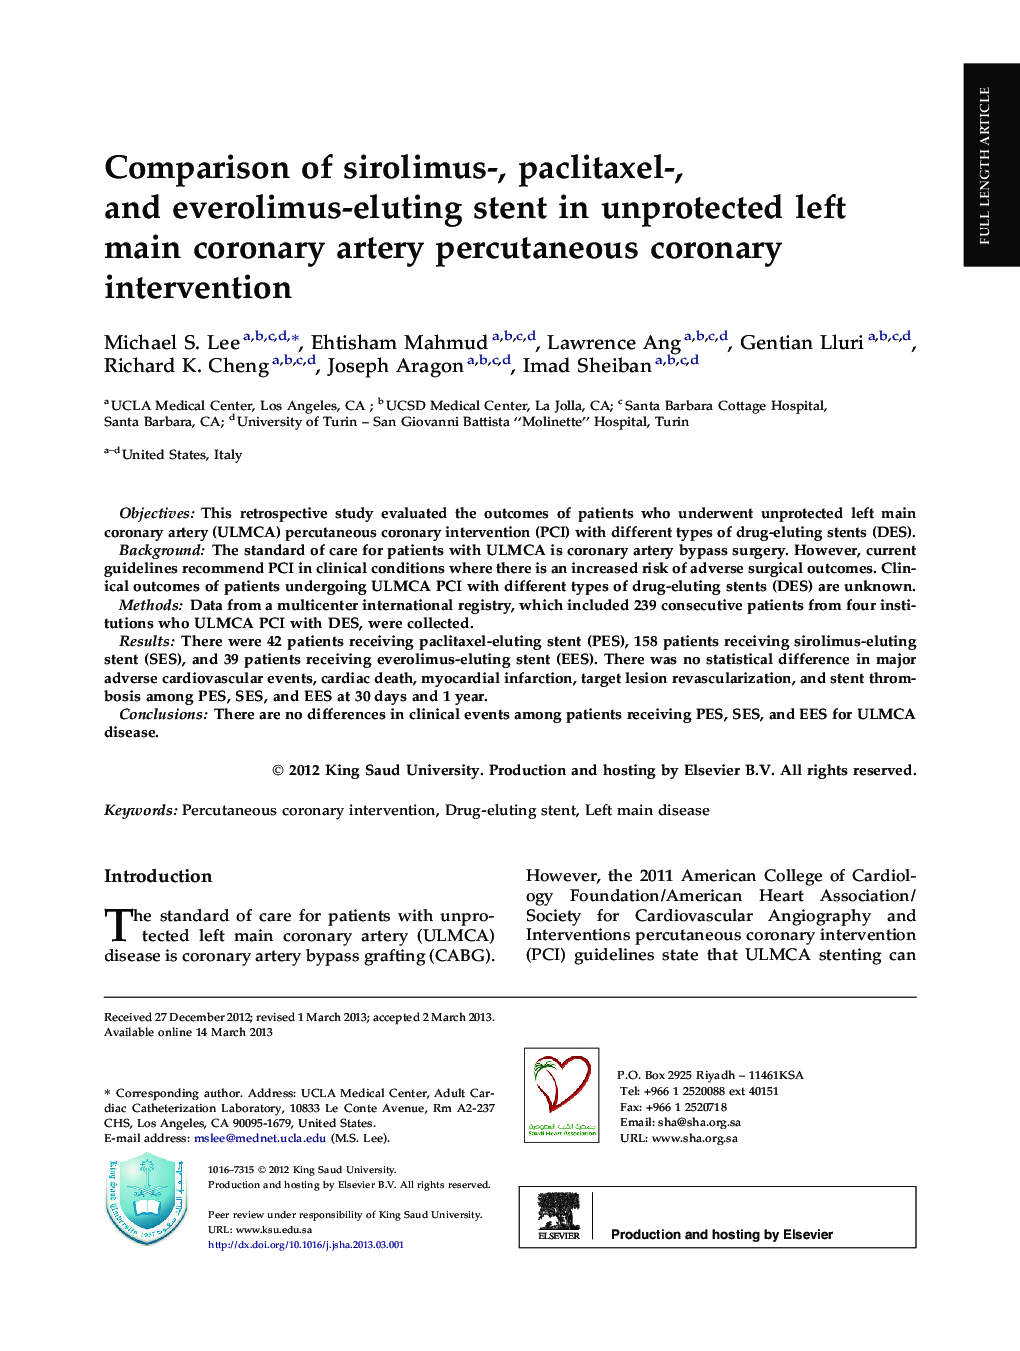 Comparison of sirolimus-, paclitaxel-, and everolimus-eluting stent in unprotected left main coronary artery percutaneous coronary intervention 